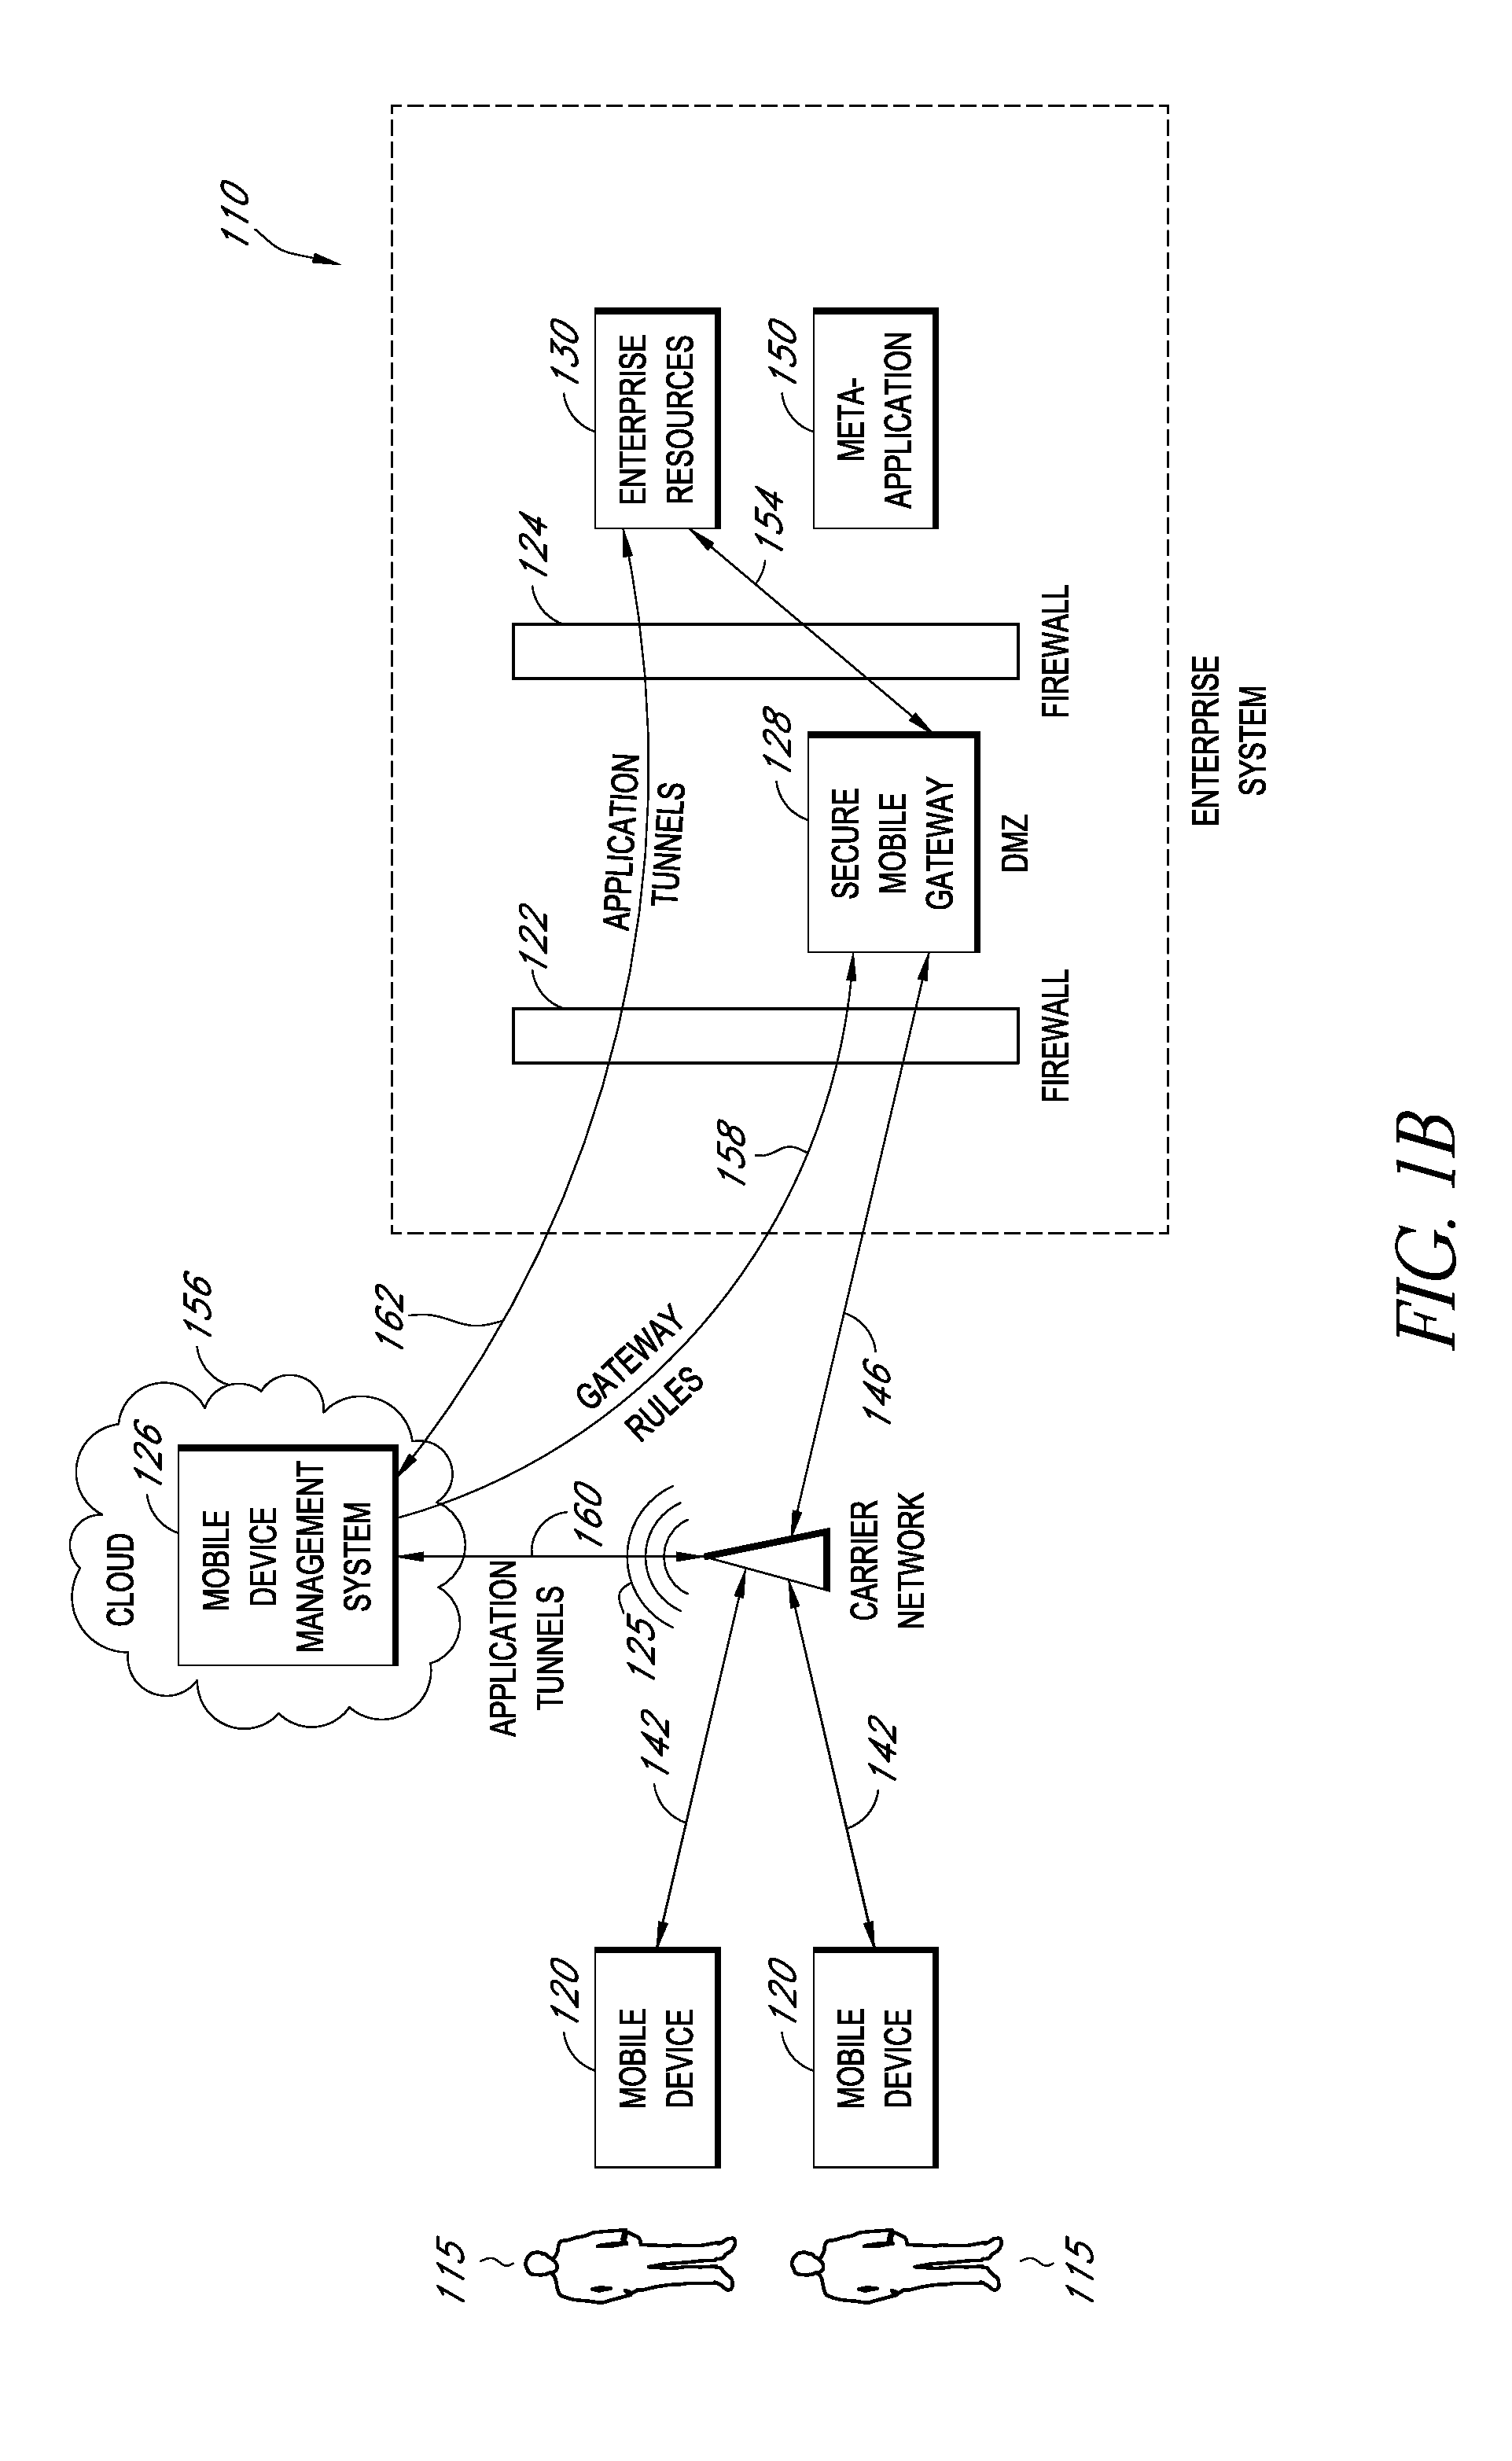 Gateway for controlling mobile device access to enterprise resources